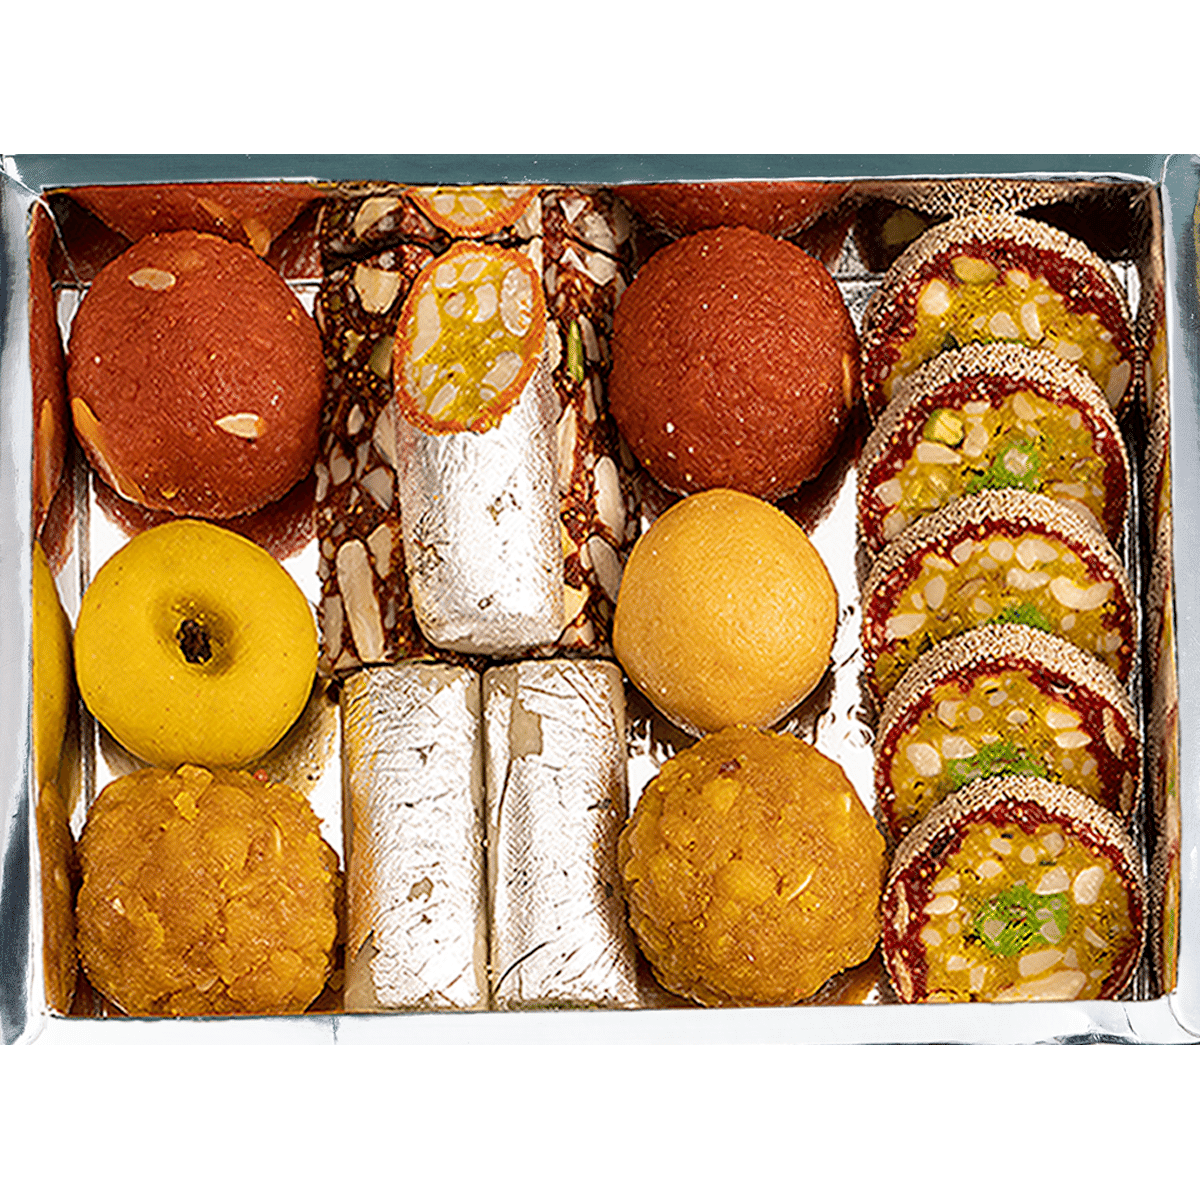 Assorted Ladoo/Dry Fruit